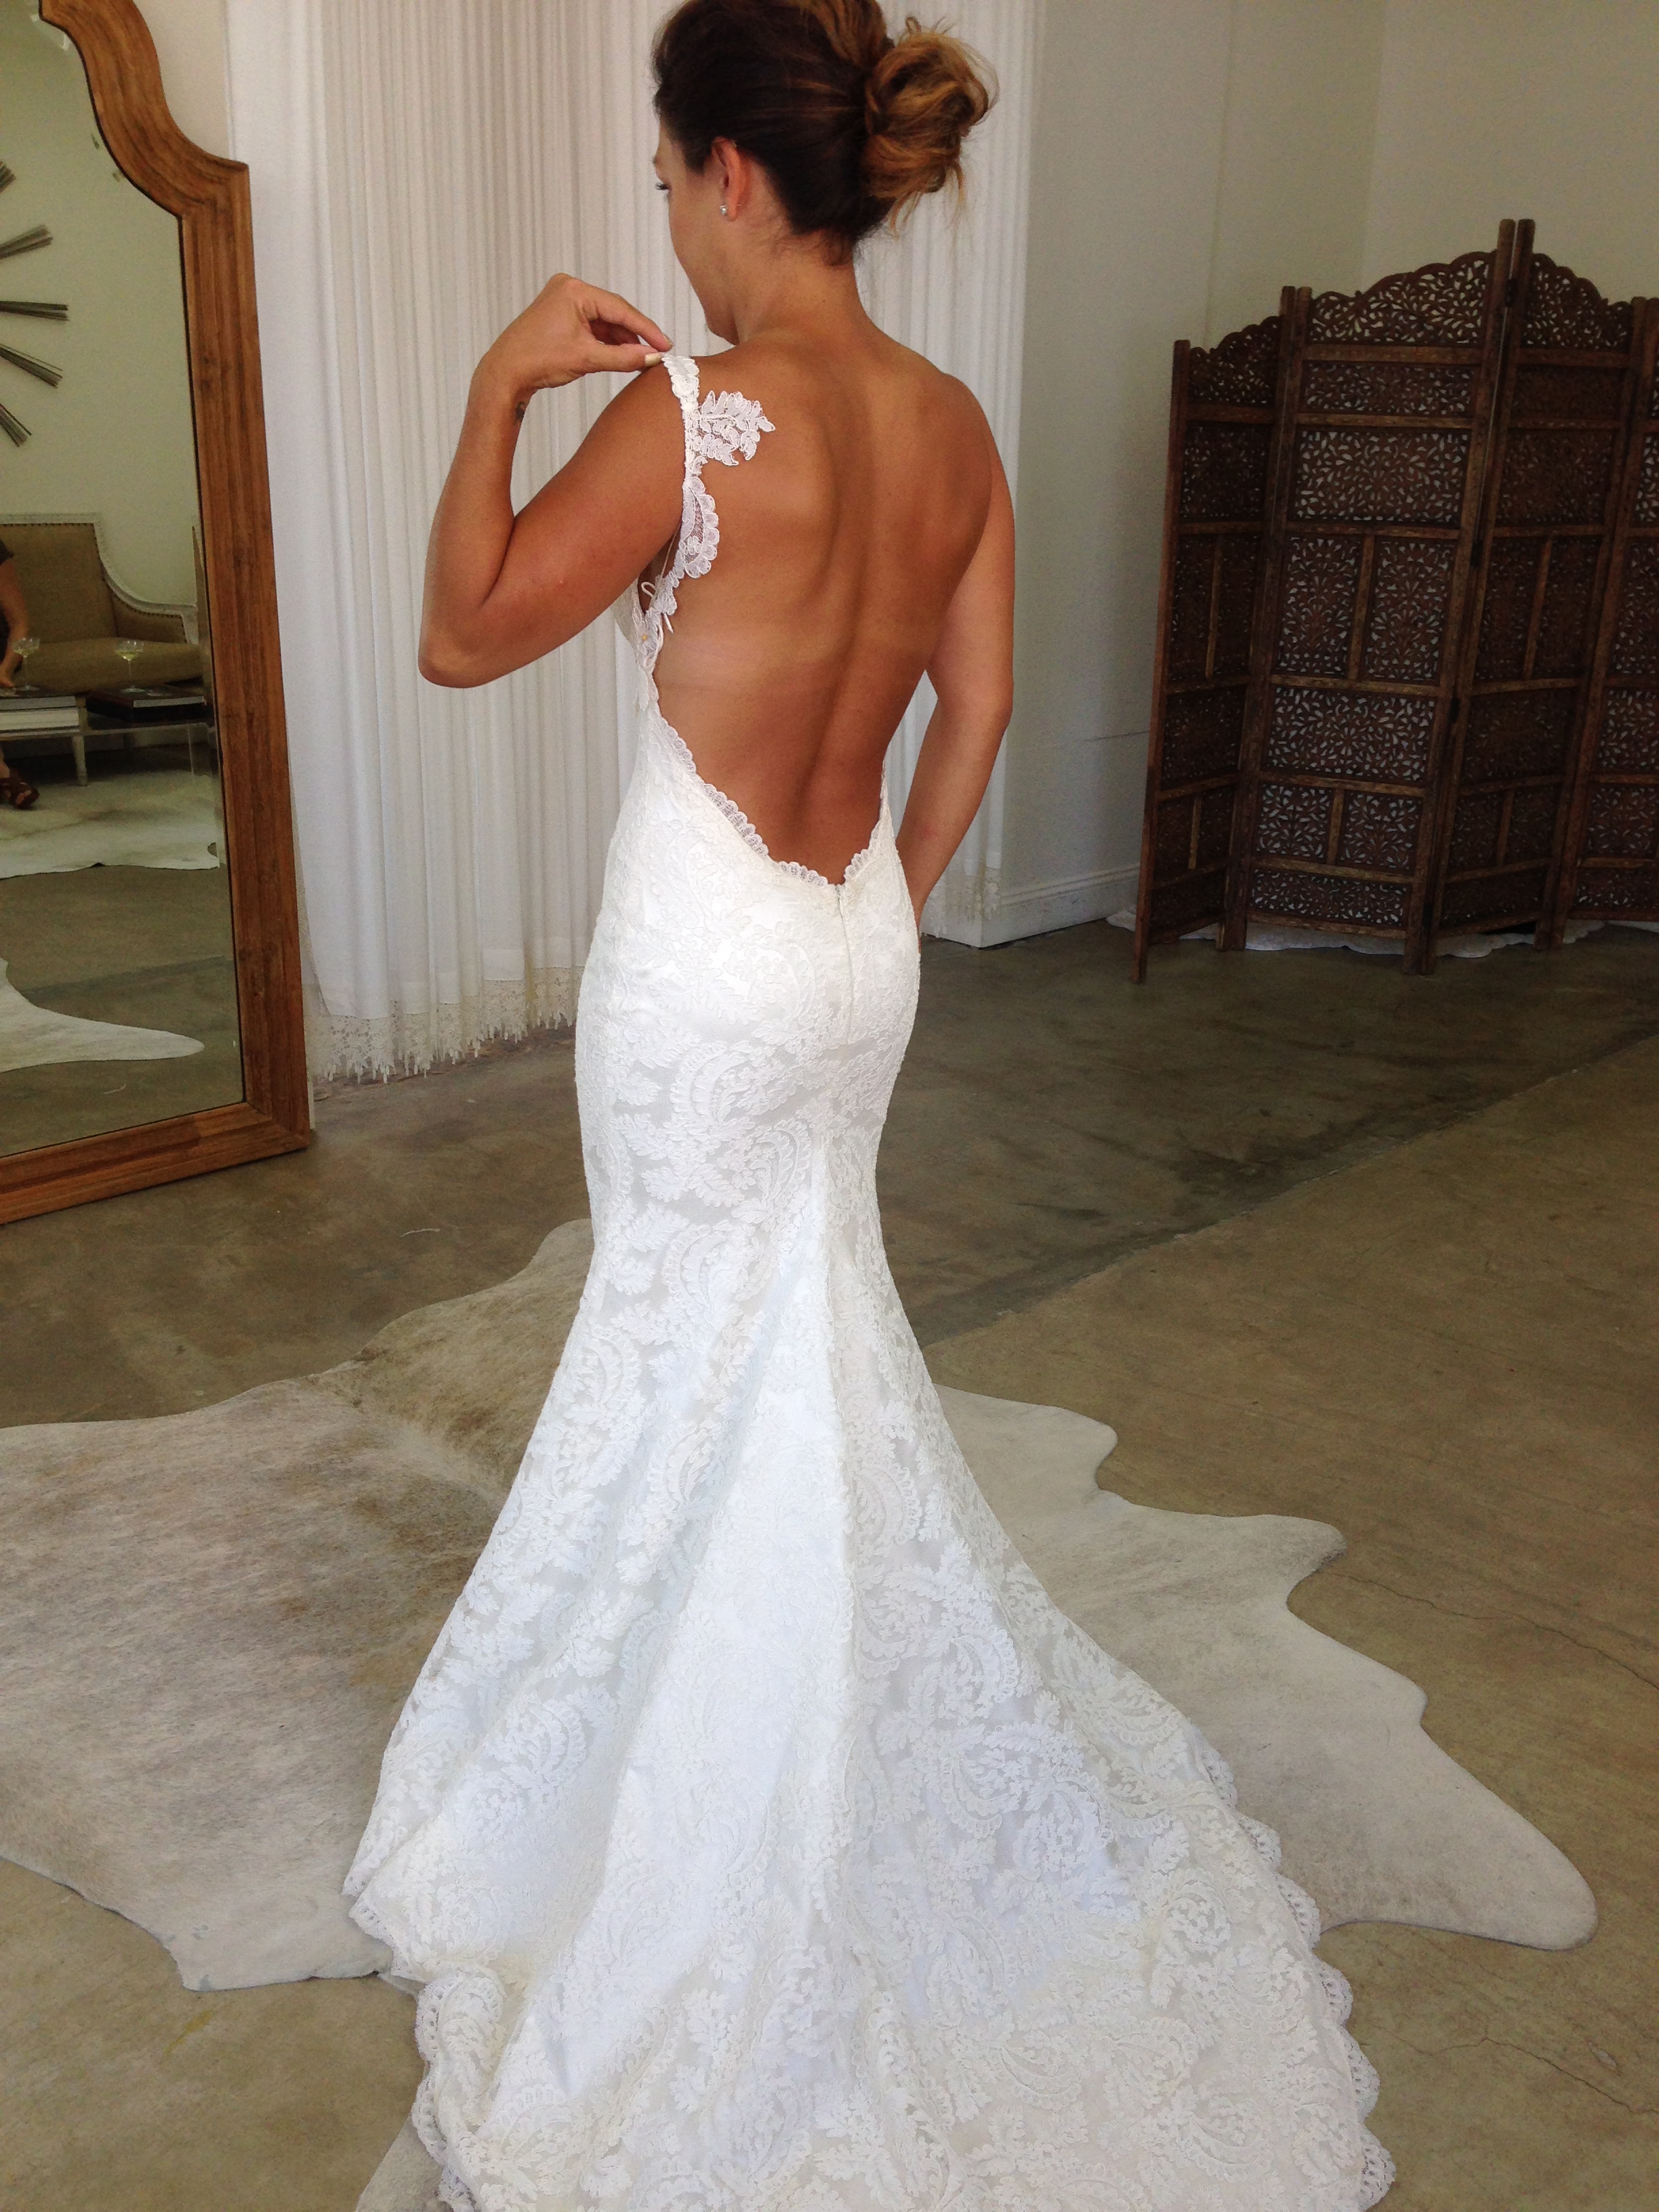 Lace Wedding Gownbackless Prom Dressfashion Bridal Dresssexy Party Dresscustom Made Evening 